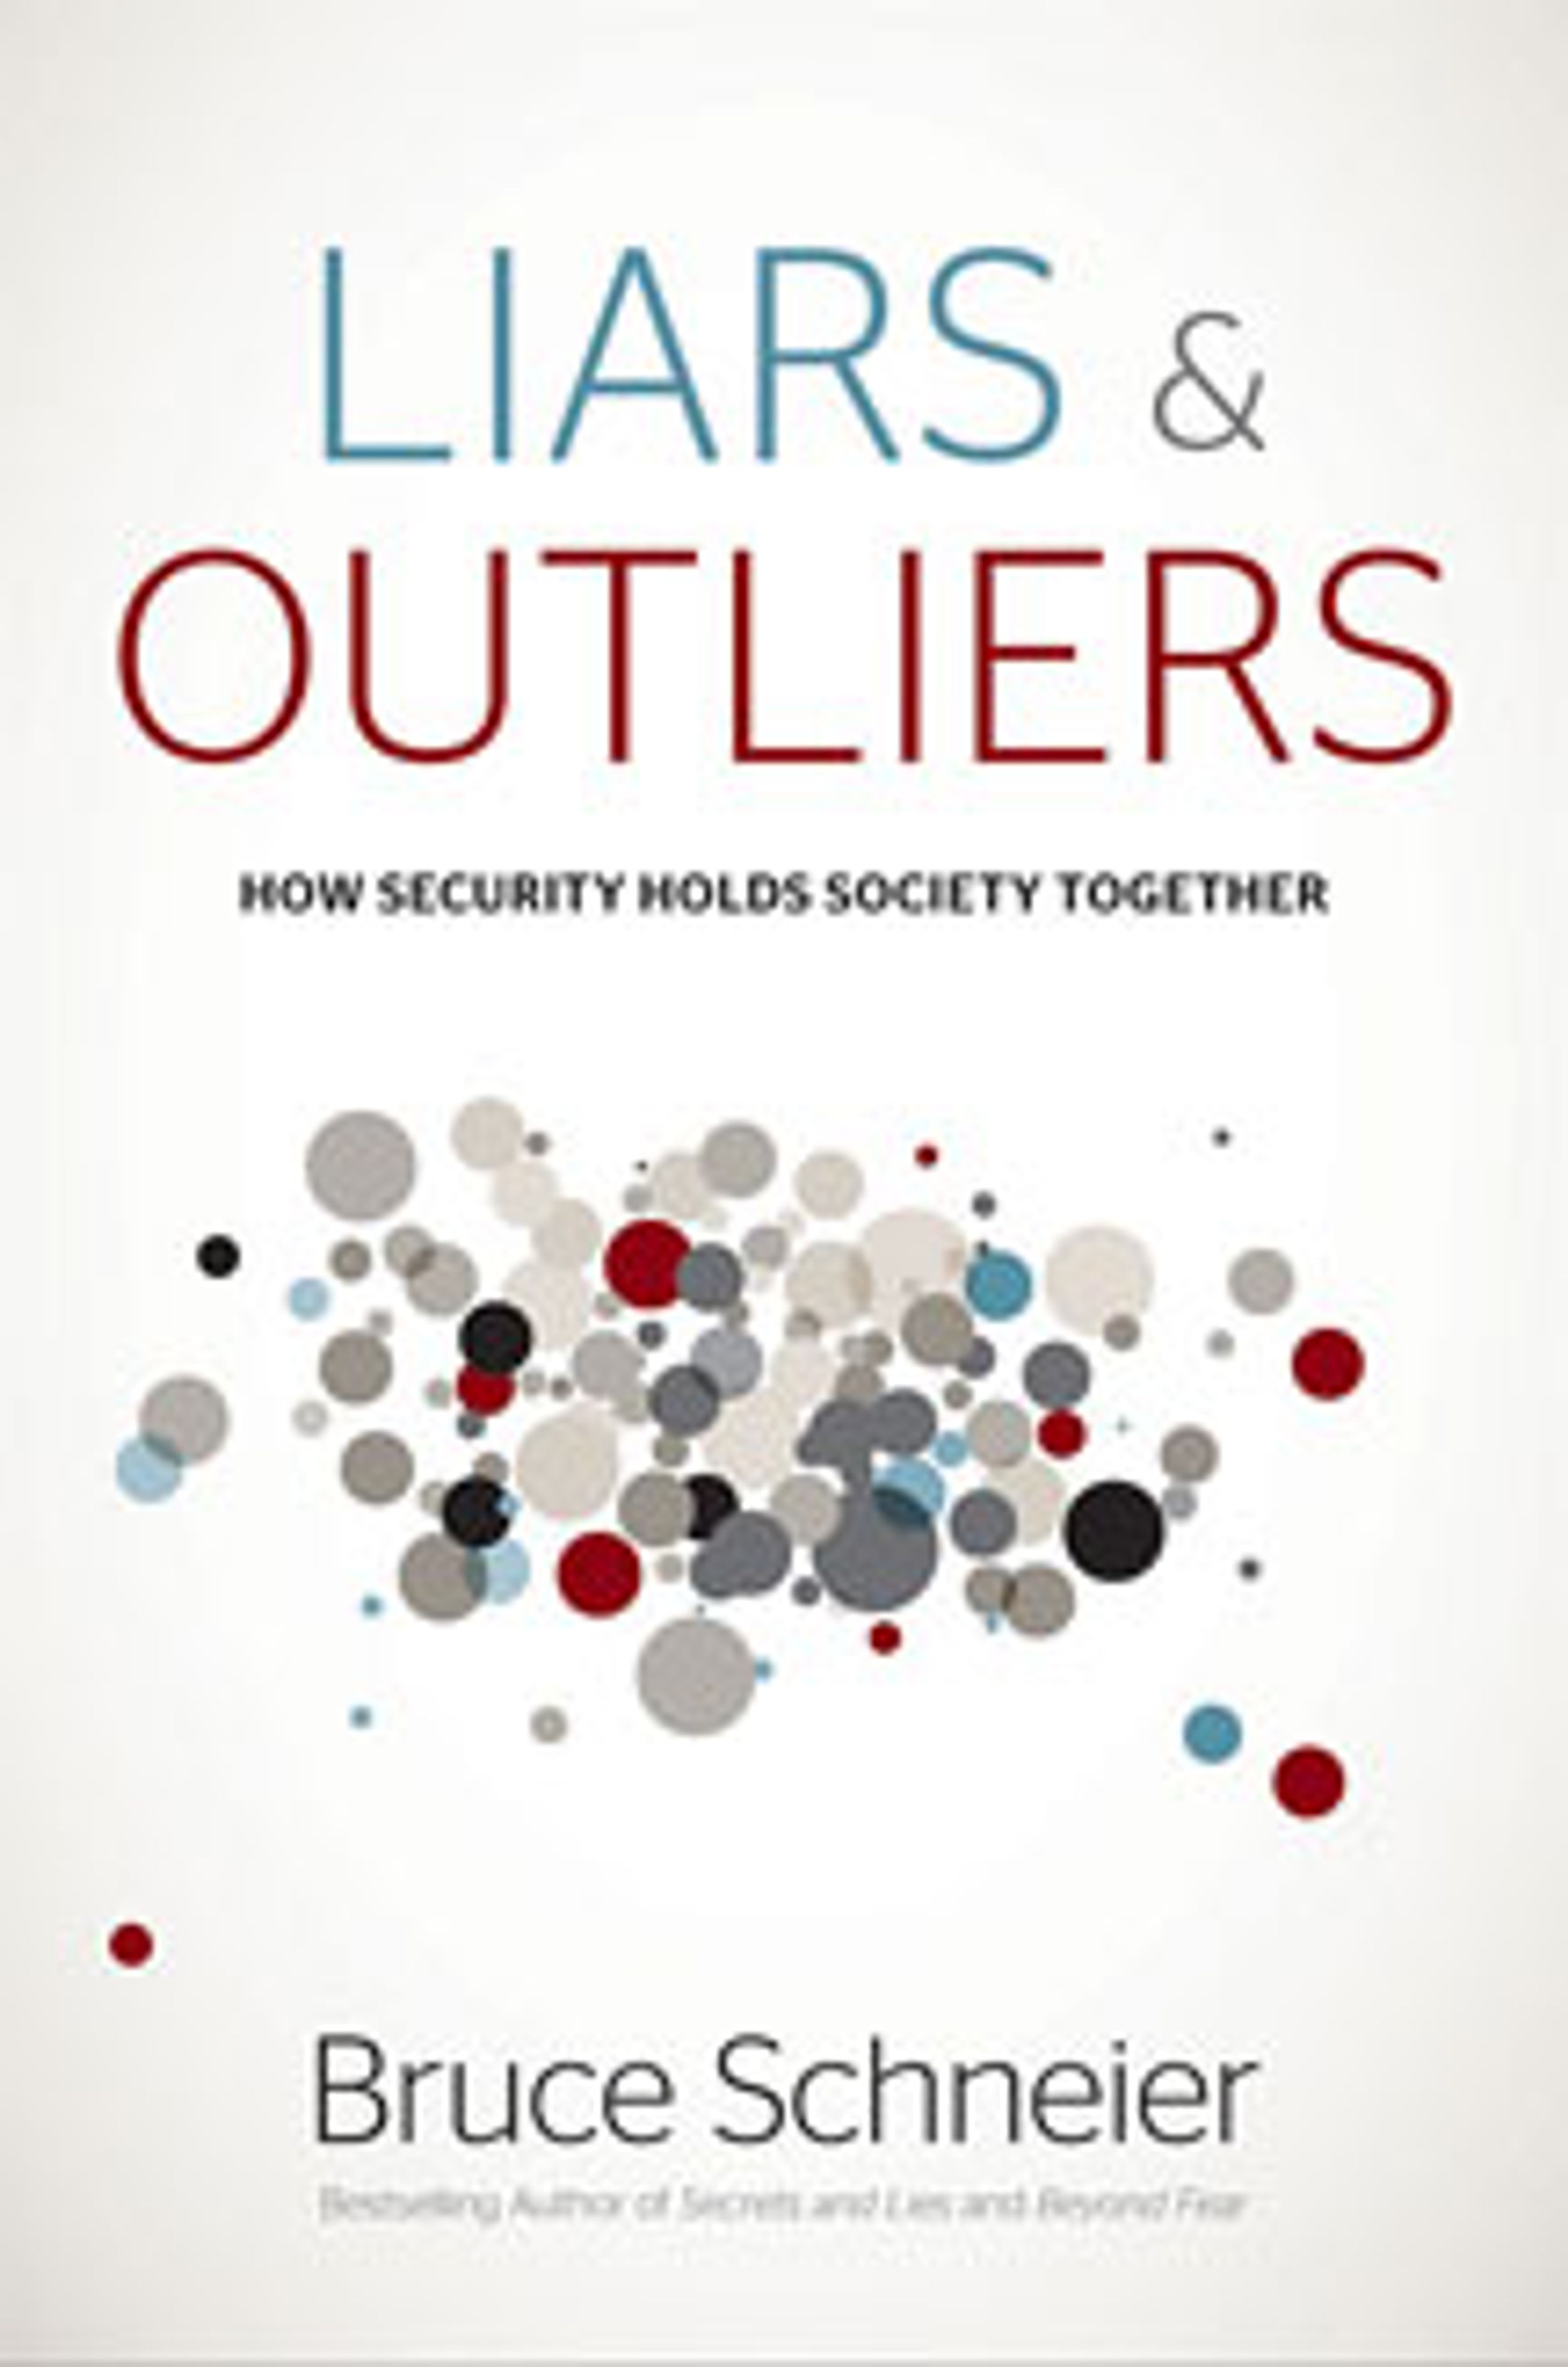 Review: Liars & Outliers